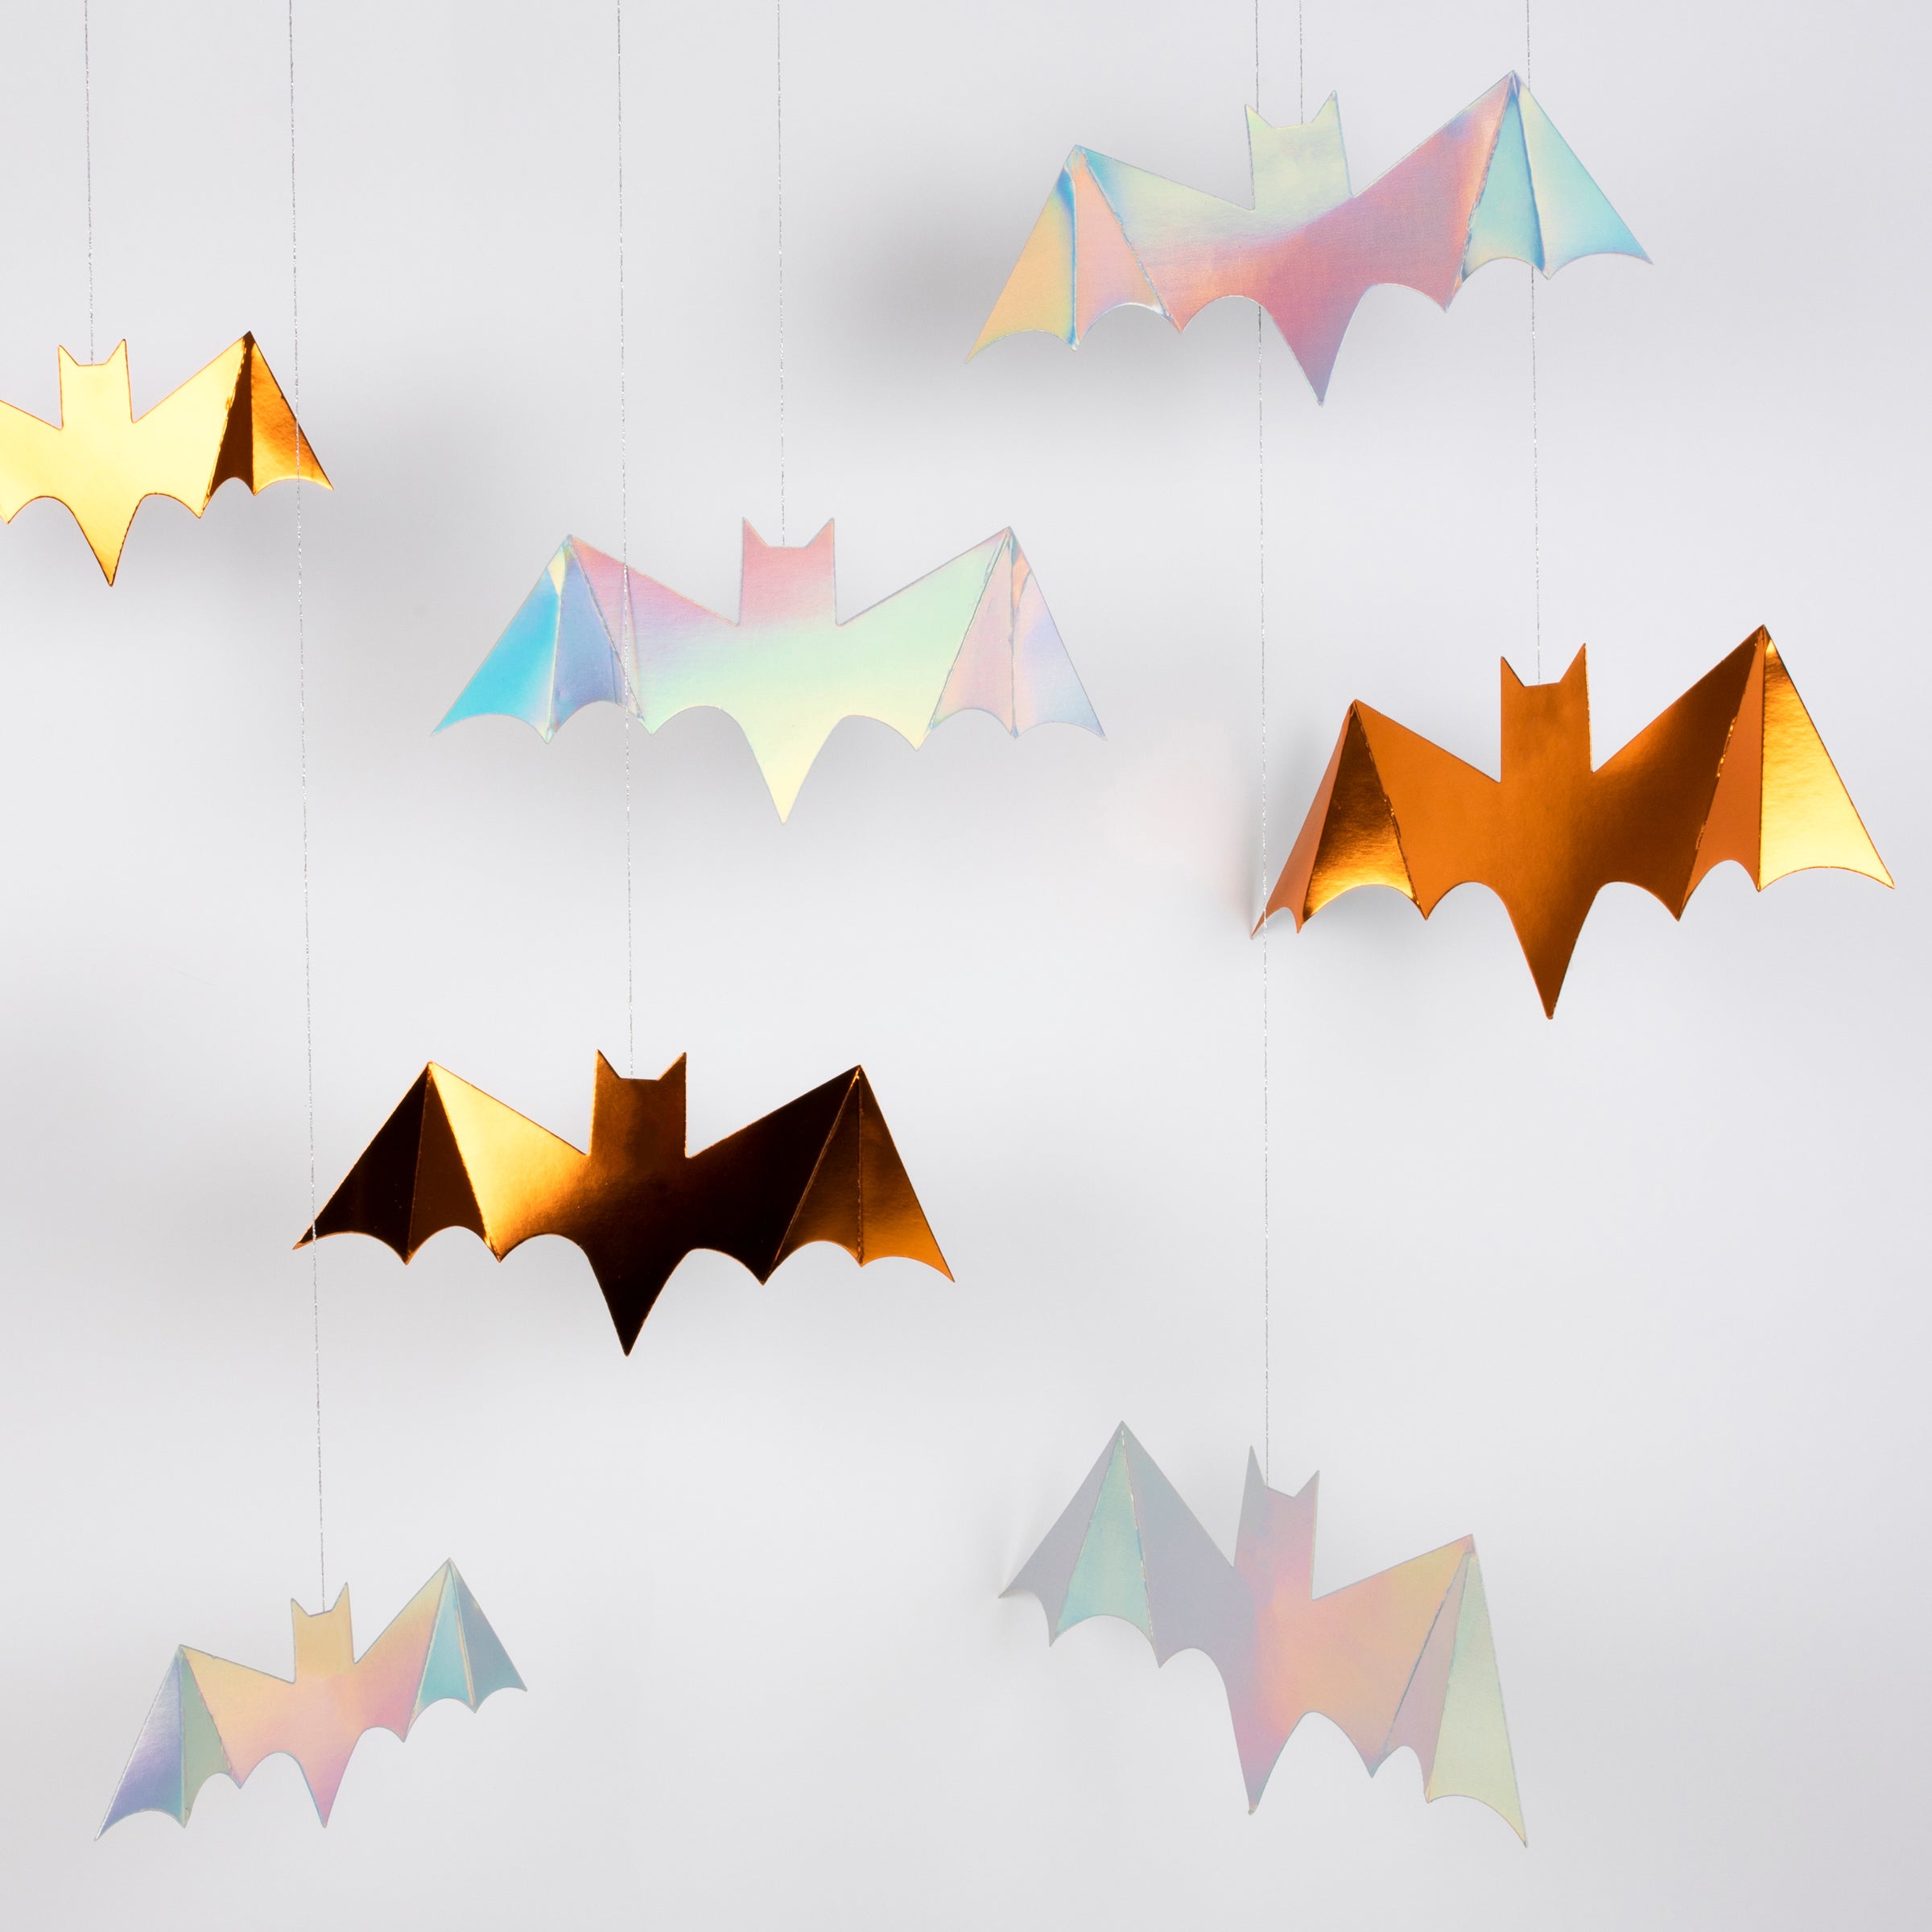 These hanging bats, with black and shiny foil details, make fabulous Halloween bat decorations.